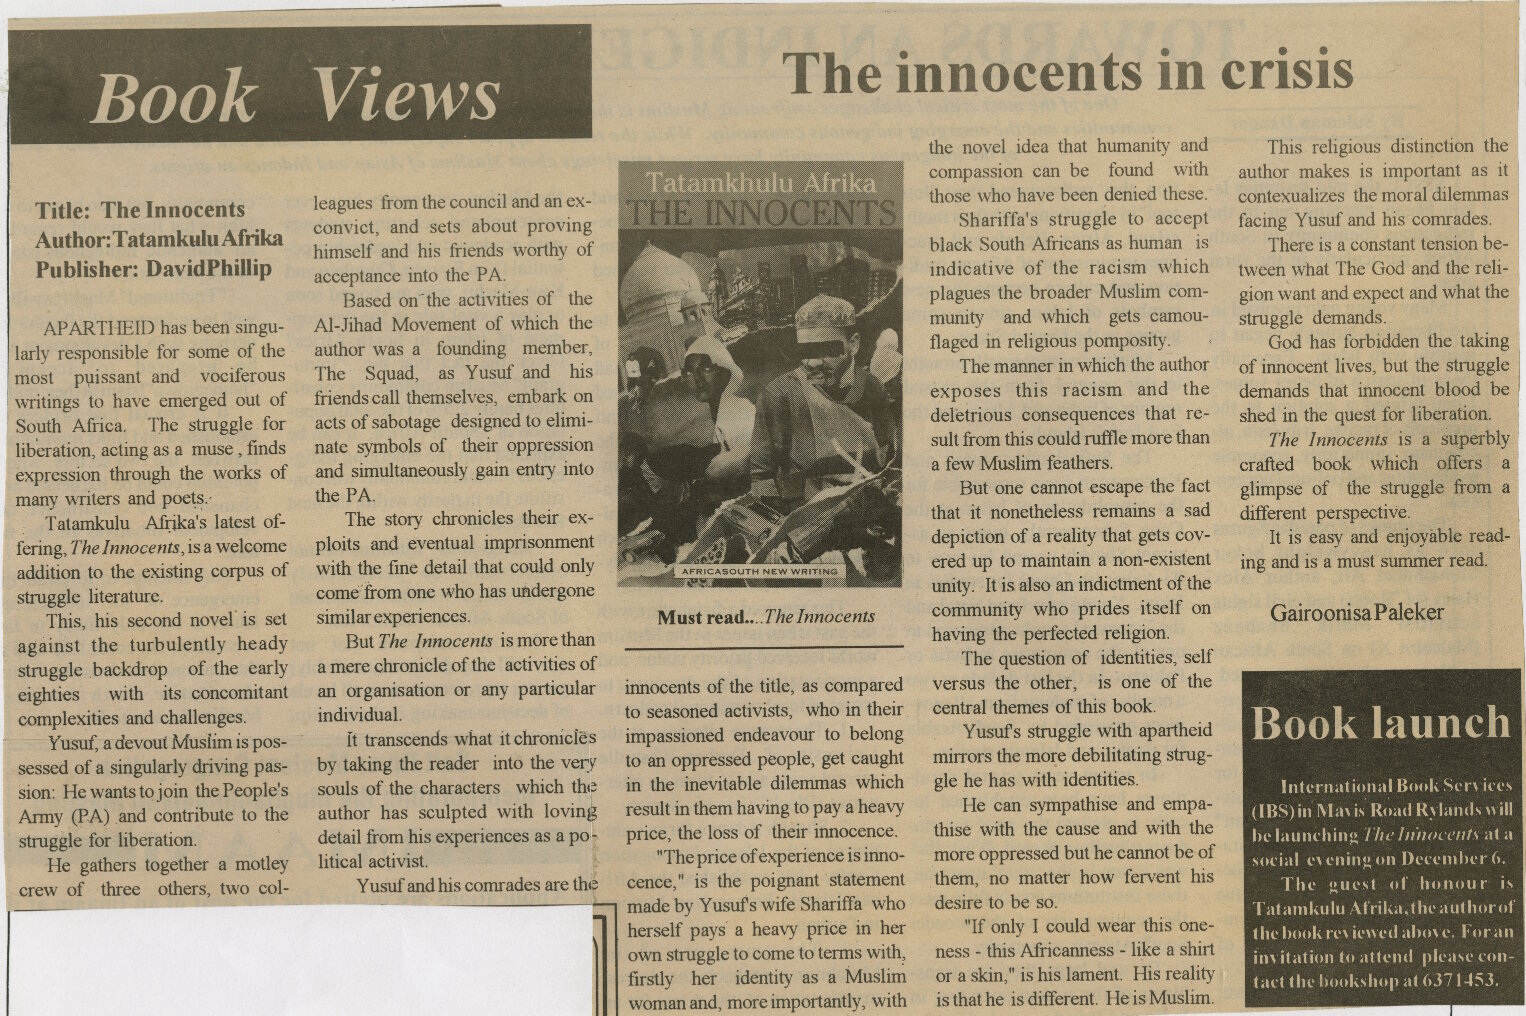 This review of <em>The Innocents</em> published in <em>Muslim Views</em> in November 1994 lauds the book as “a welcome addition to the existing corpus of struggle literature”. It points out the significant moral dilemma faced by the Muslim characters in navigating African and Muslim identities